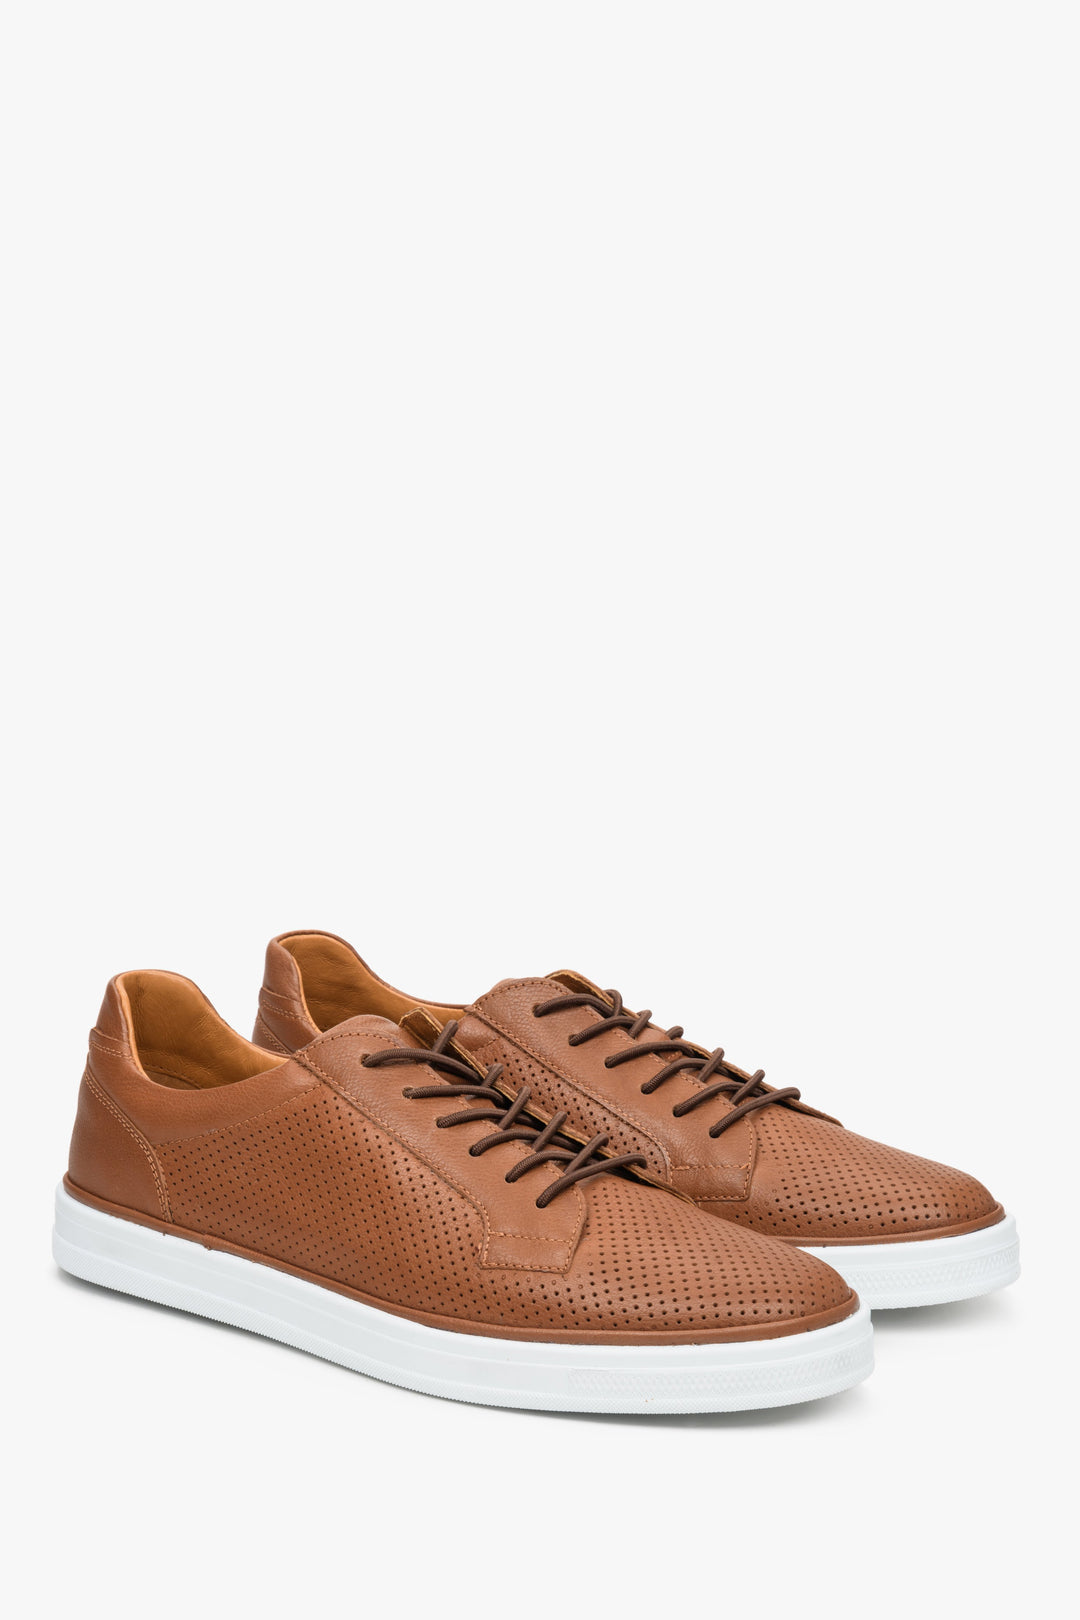 Men's brown sneakers with perforations and lacing - Estro brand model for the summer.